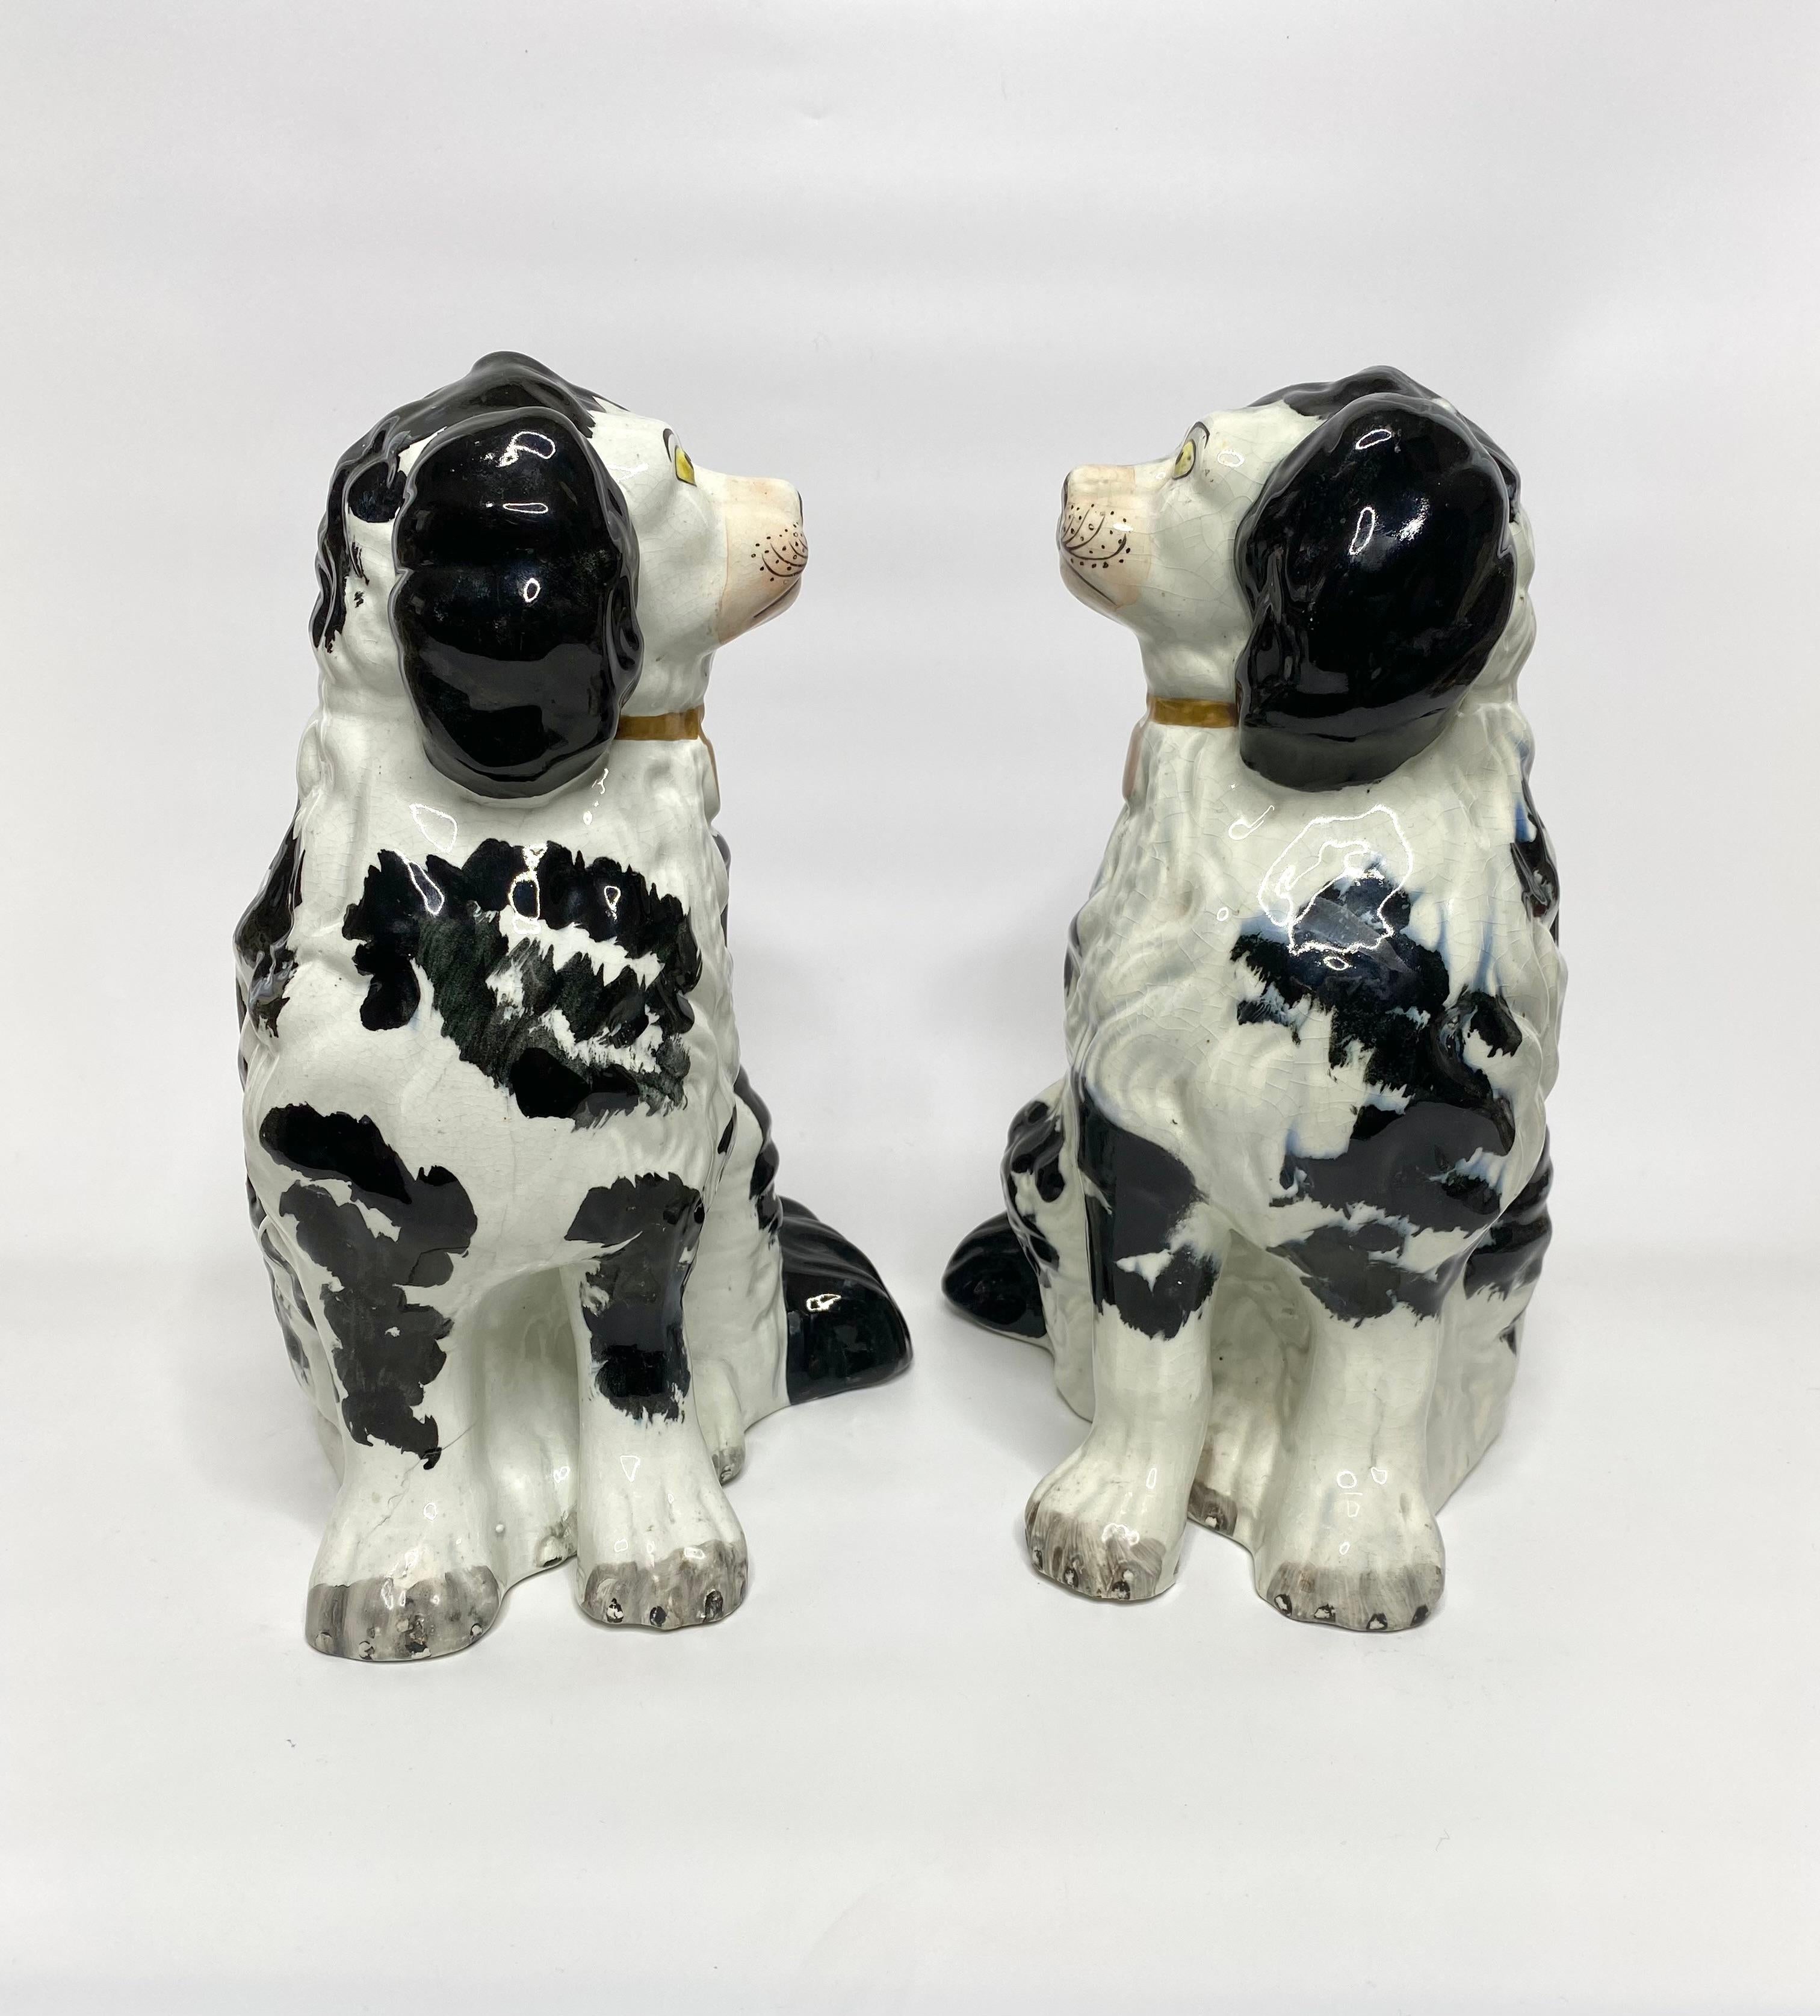 Fired Pair of large and rare Staffordshire Spaniels, c. 1840.